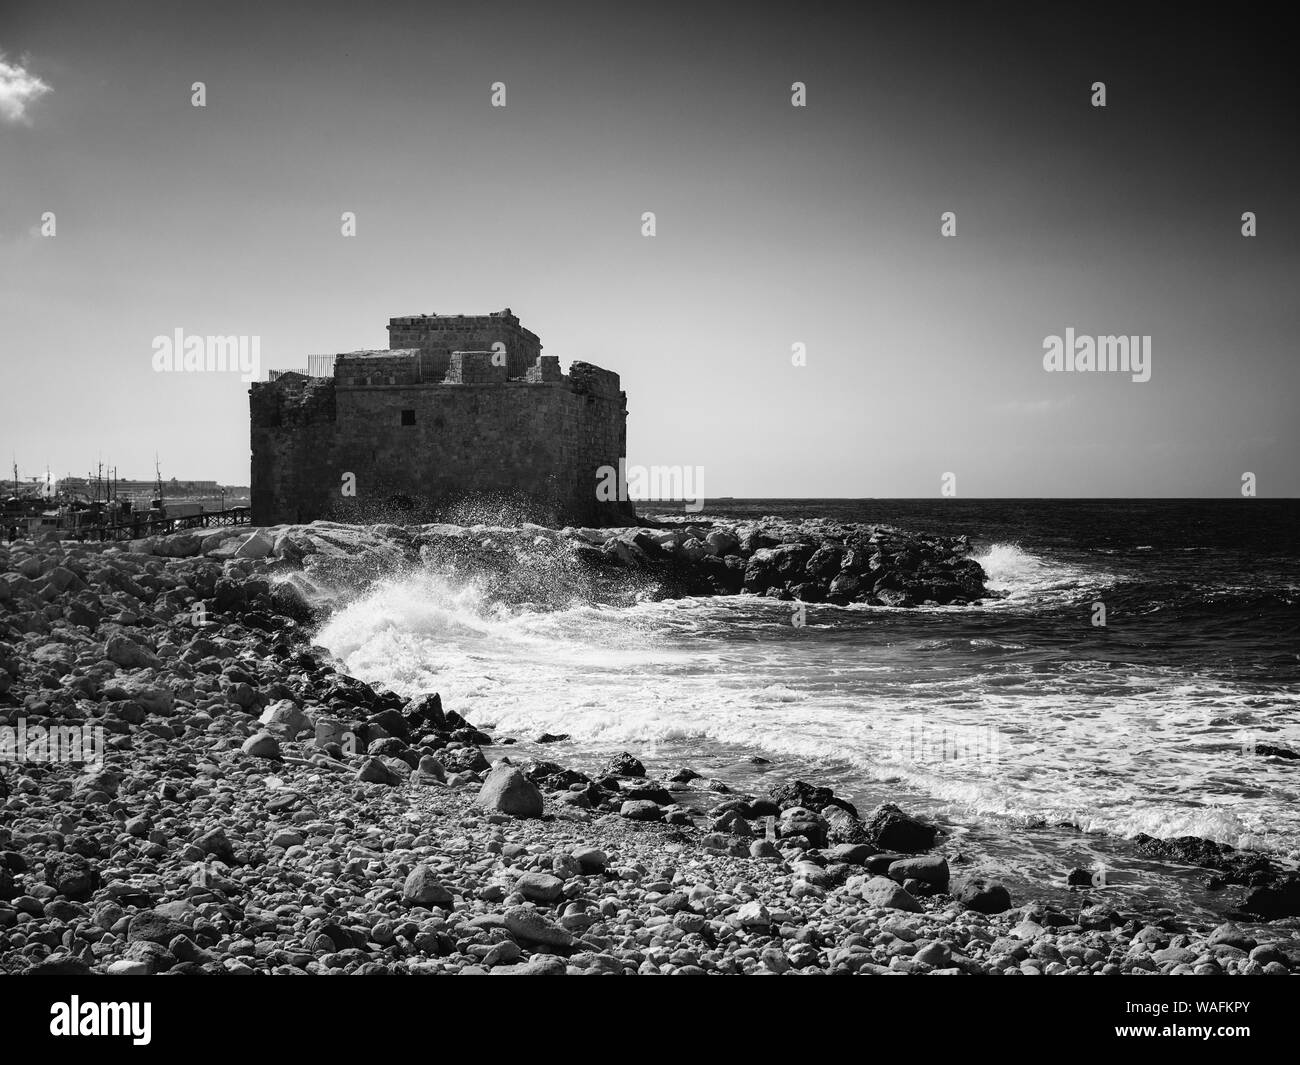 Paphos (Pafos), Cyprus - Seashore near the medieval fort in b&w Stock Photo